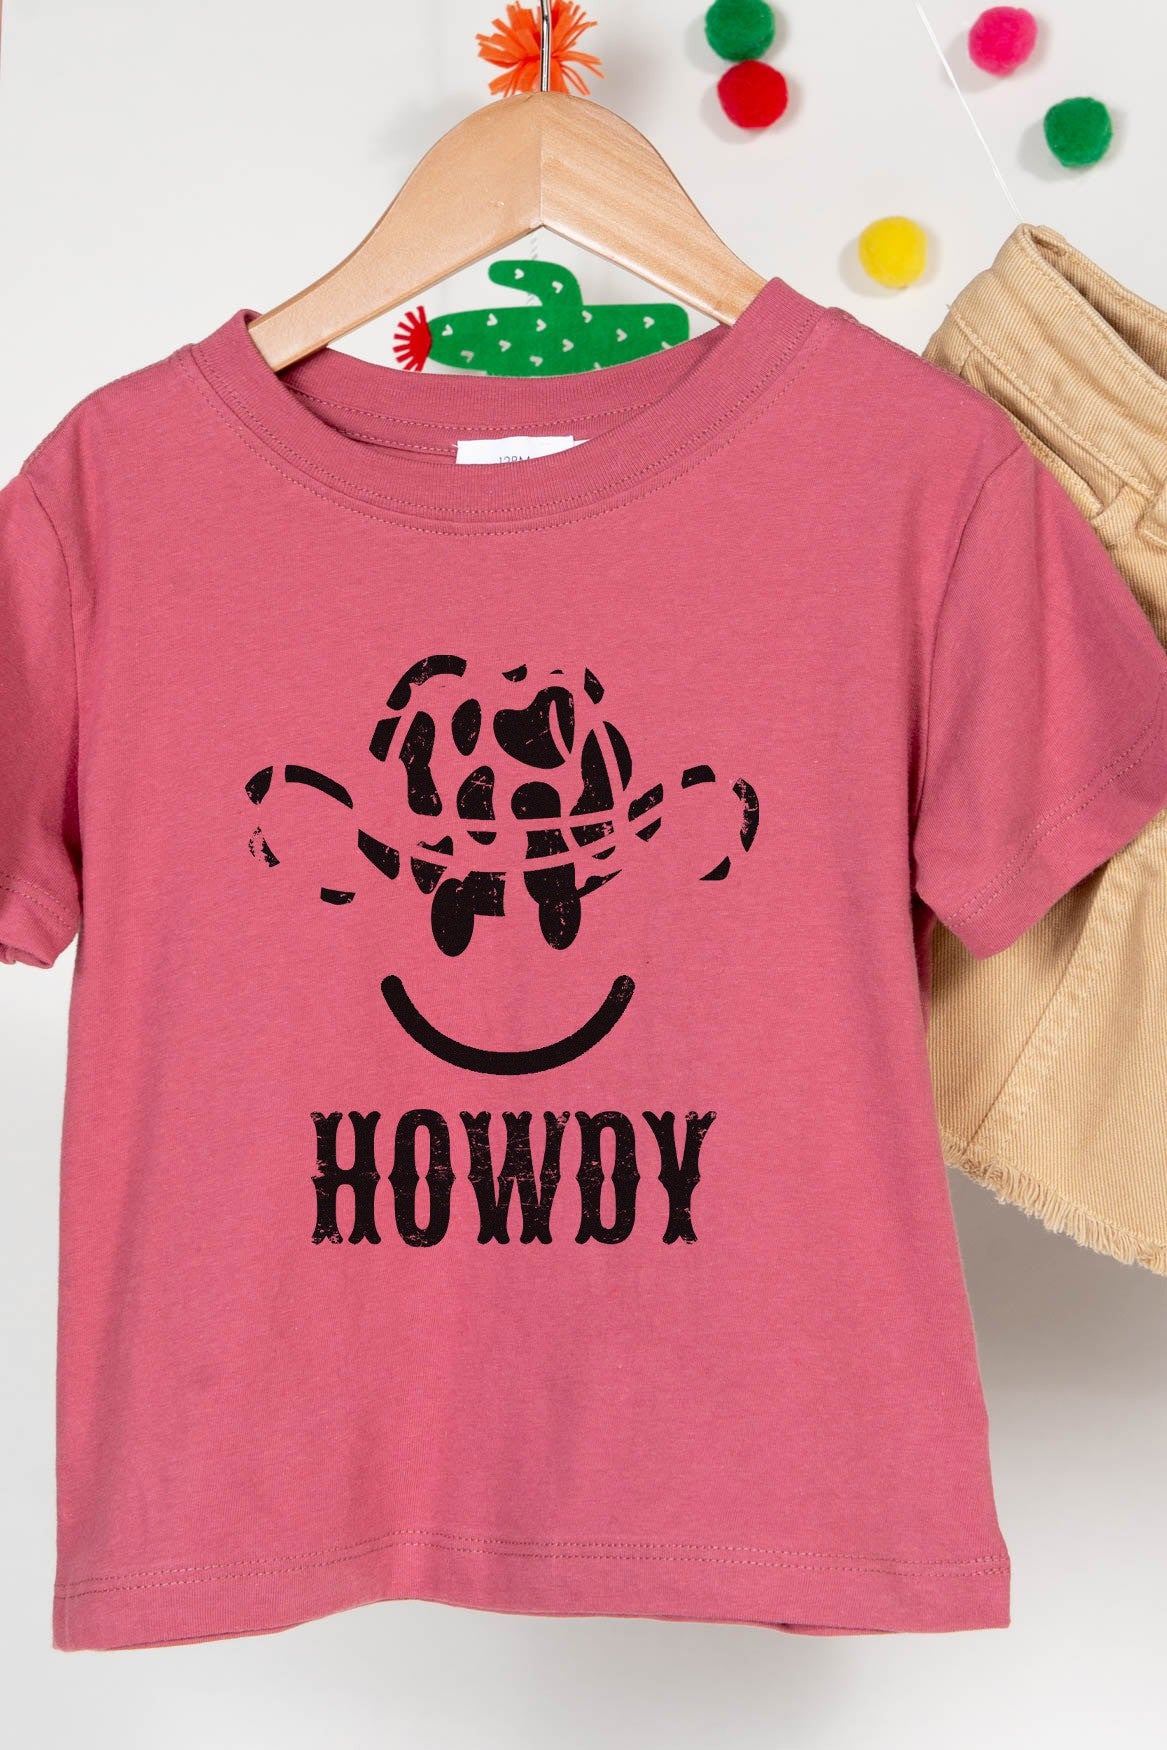 Youth Cowboy Howdy Top